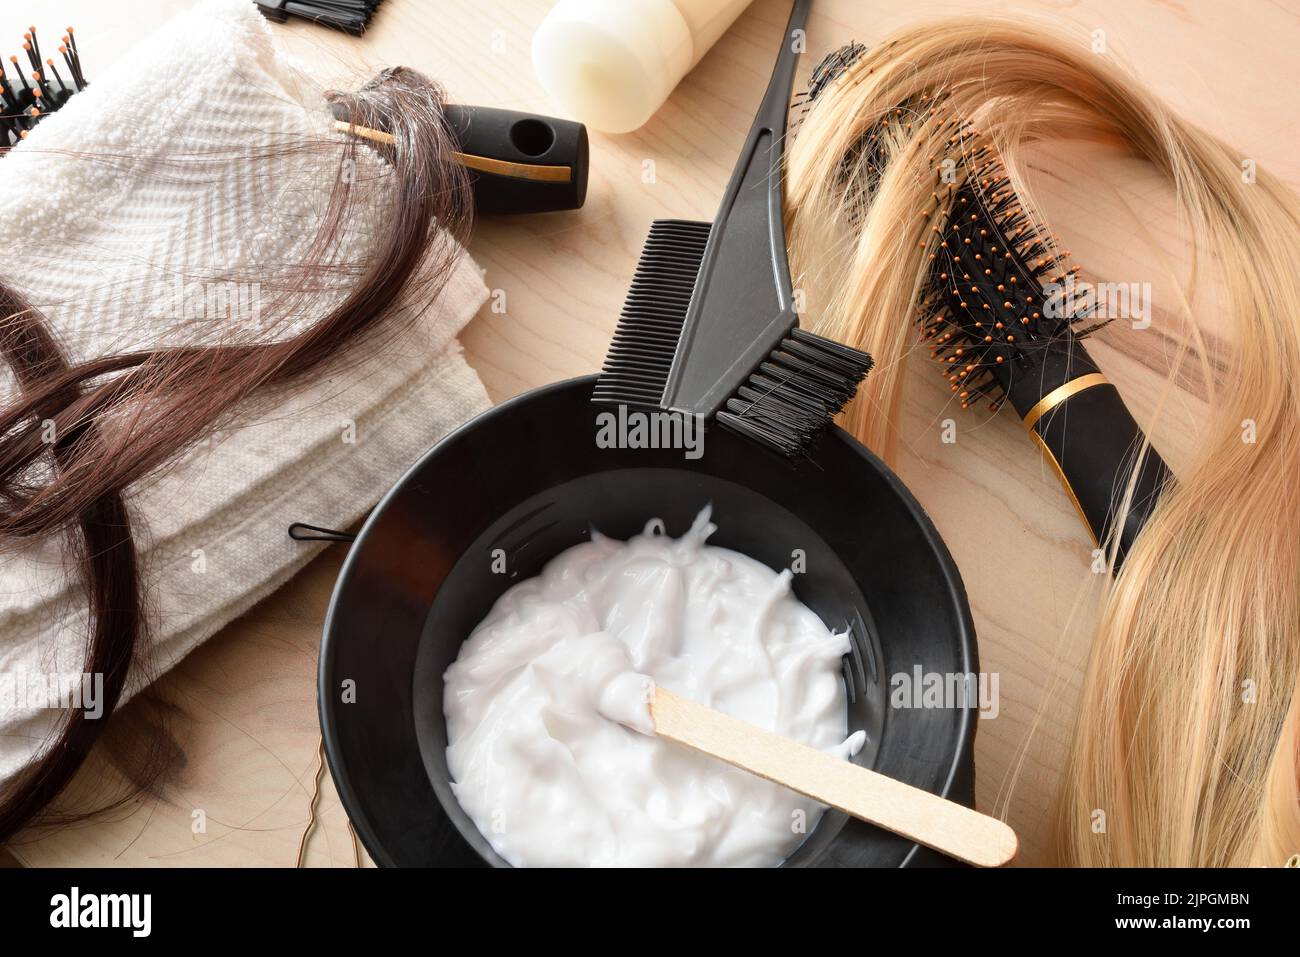 Detail of set of hair treatment products on wooden table. Top view. Horizontal composition. Stock Photo